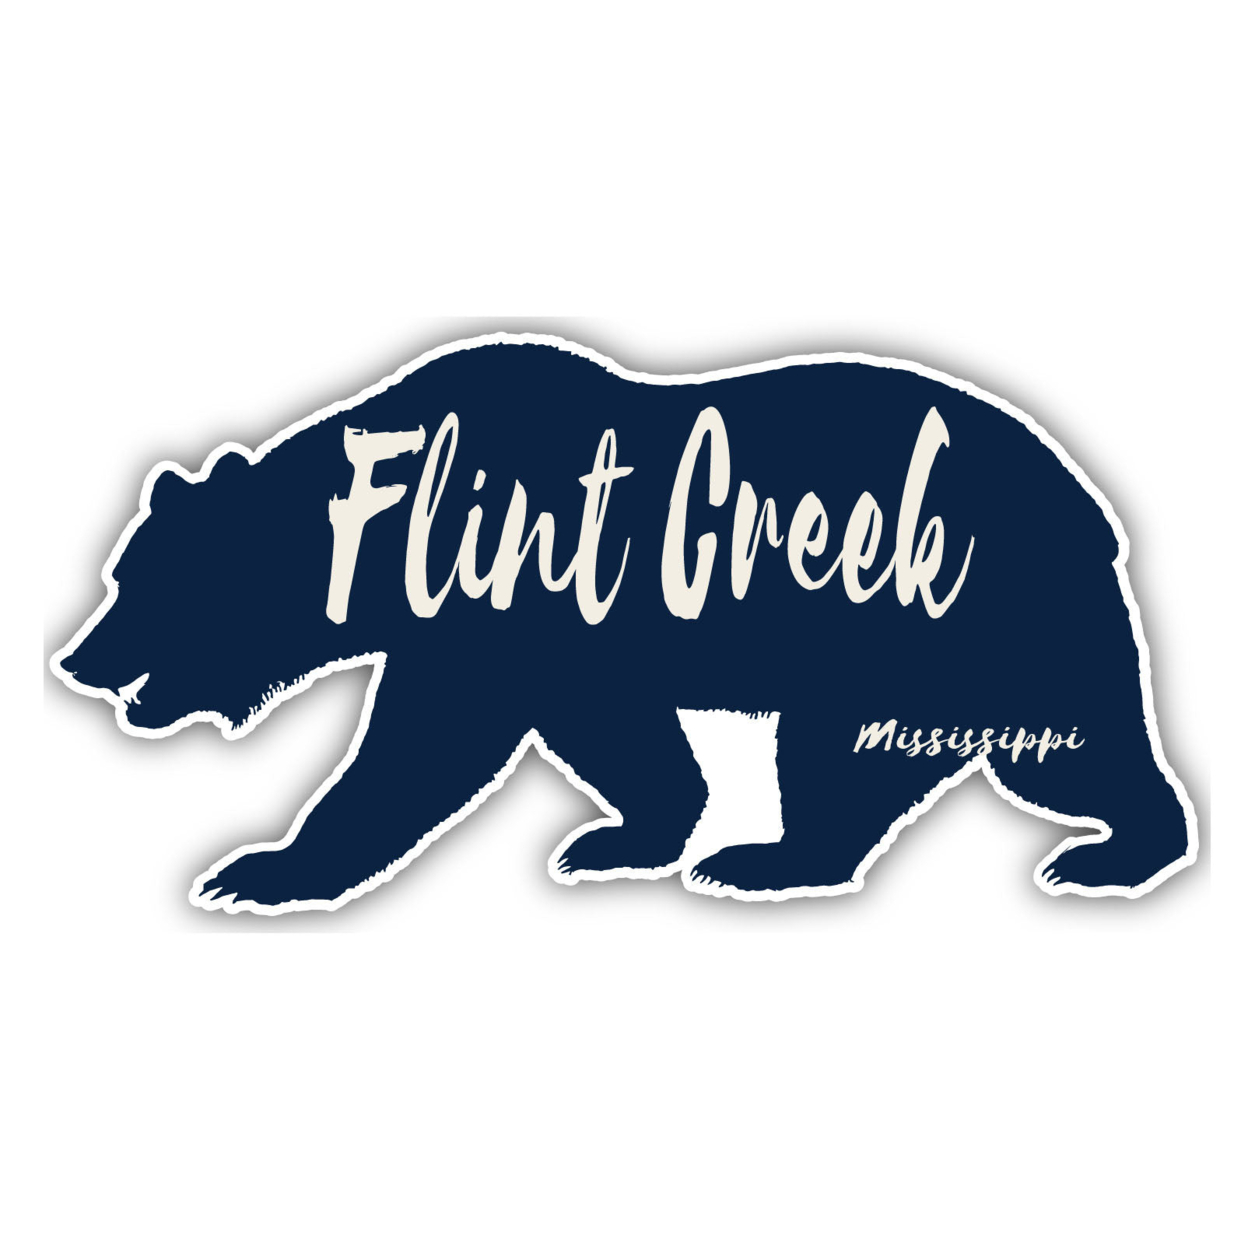 Flint Creek Mississippi Souvenir Decorative Stickers (Choose Theme And Size) - 4-Pack, 10-Inch, Bear